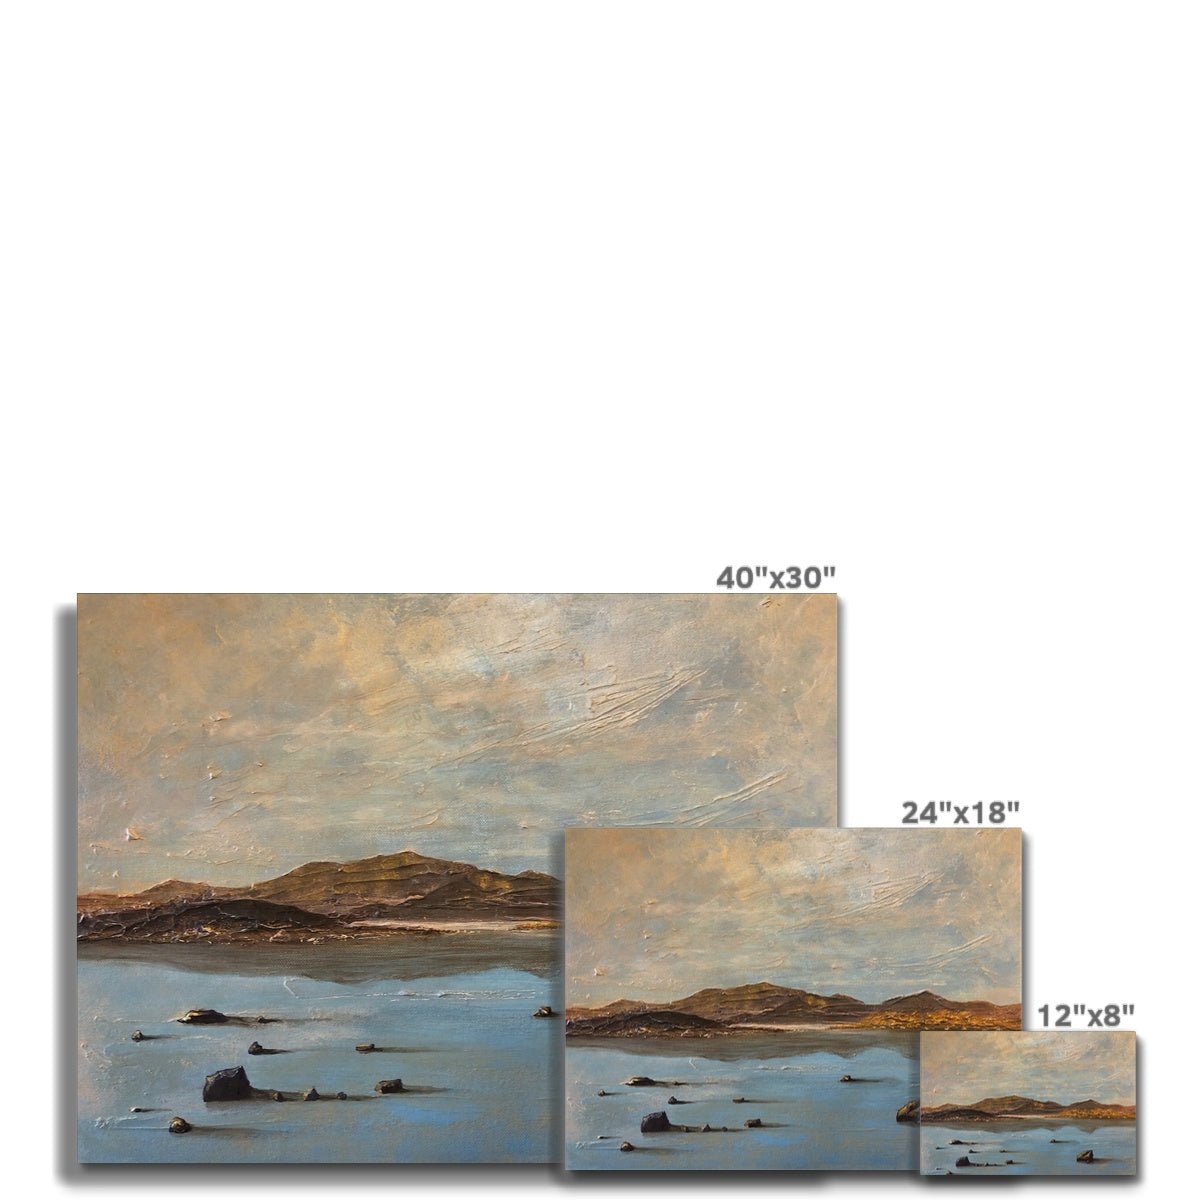 Loch Druidibeg South Uist Painting | Canvas From Scotland-Contemporary Stretched Canvas Prints-Scottish Lochs Art Gallery-Paintings, Prints, Homeware, Art Gifts From Scotland By Scottish Artist Kevin Hunter